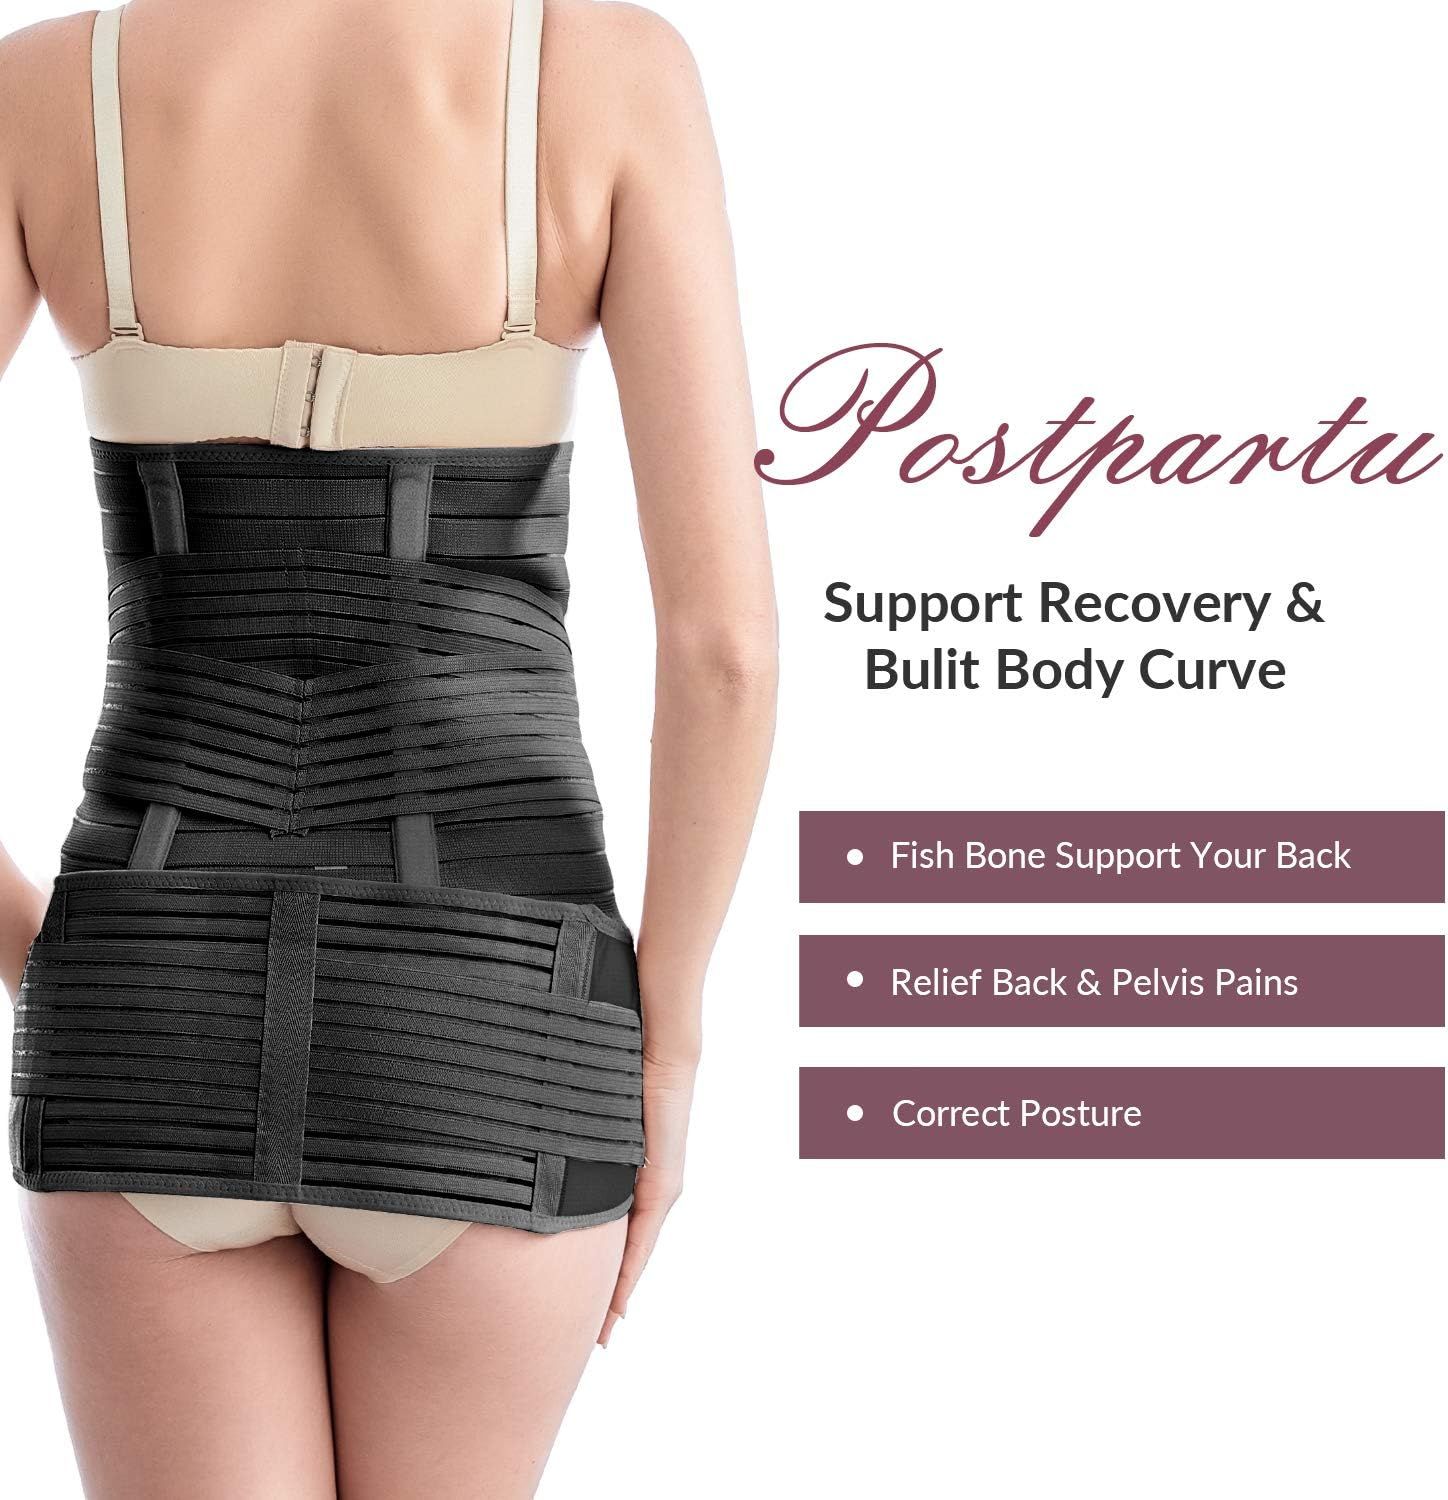 TiRain 2 in 1 Postpartum Belly Band Support Recovery Waist Belly Pelvis  Belly Band for Post Partum/Pregnancy Reovery Belt, Health & Nutrition,  Braces, Support & Protection on Carousell